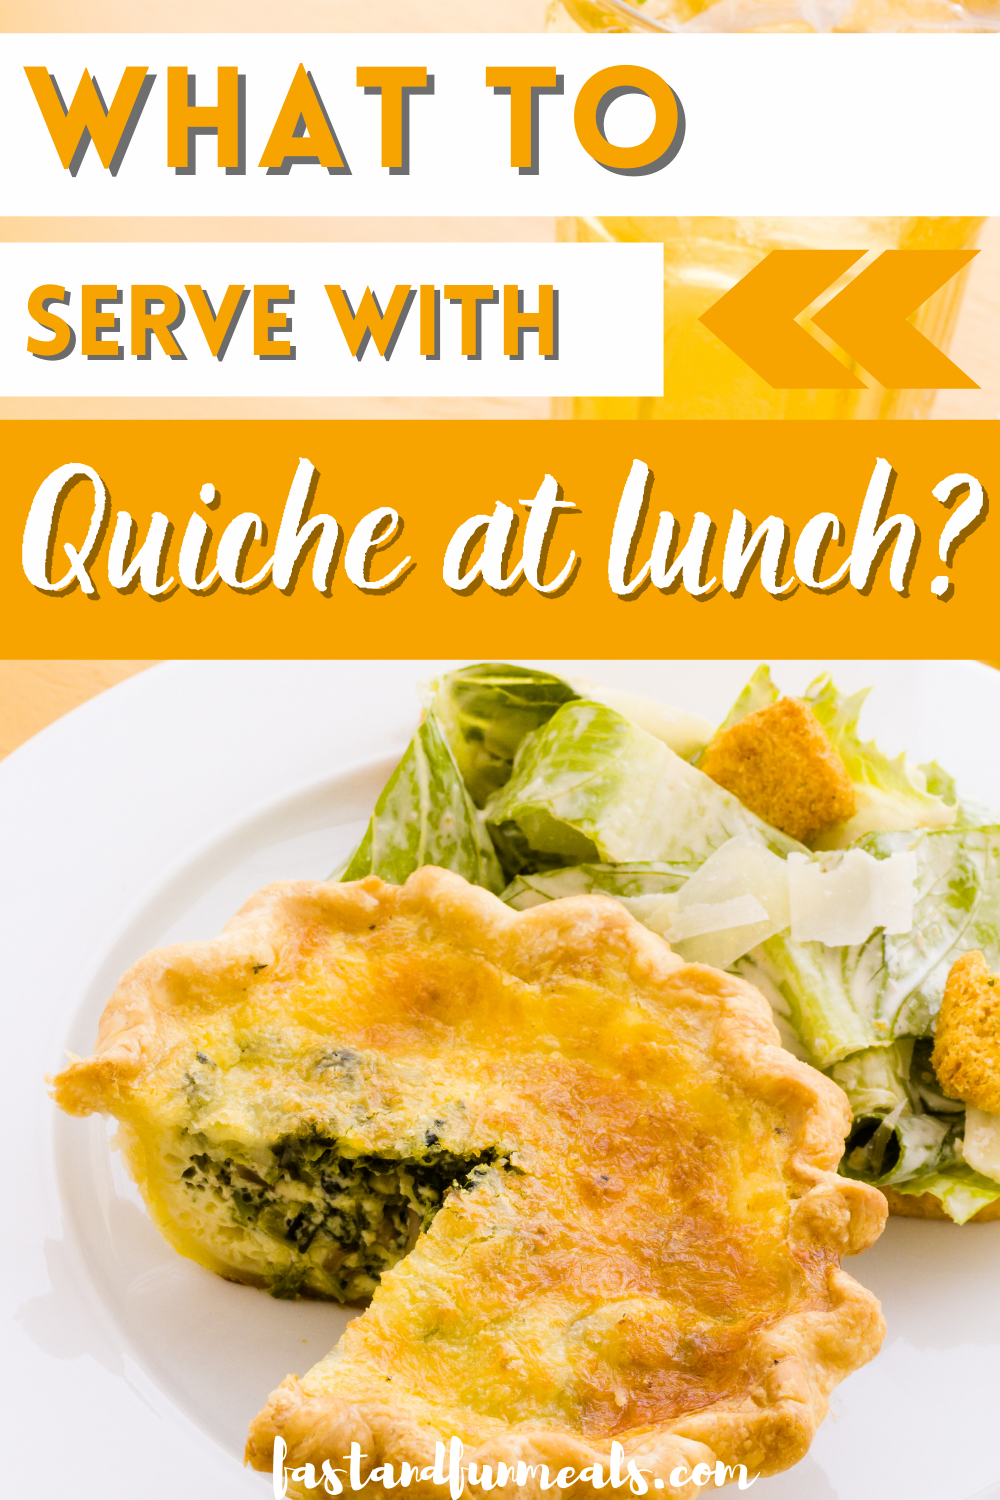 Pin showing the title What to Serve With Quiche at Lunch